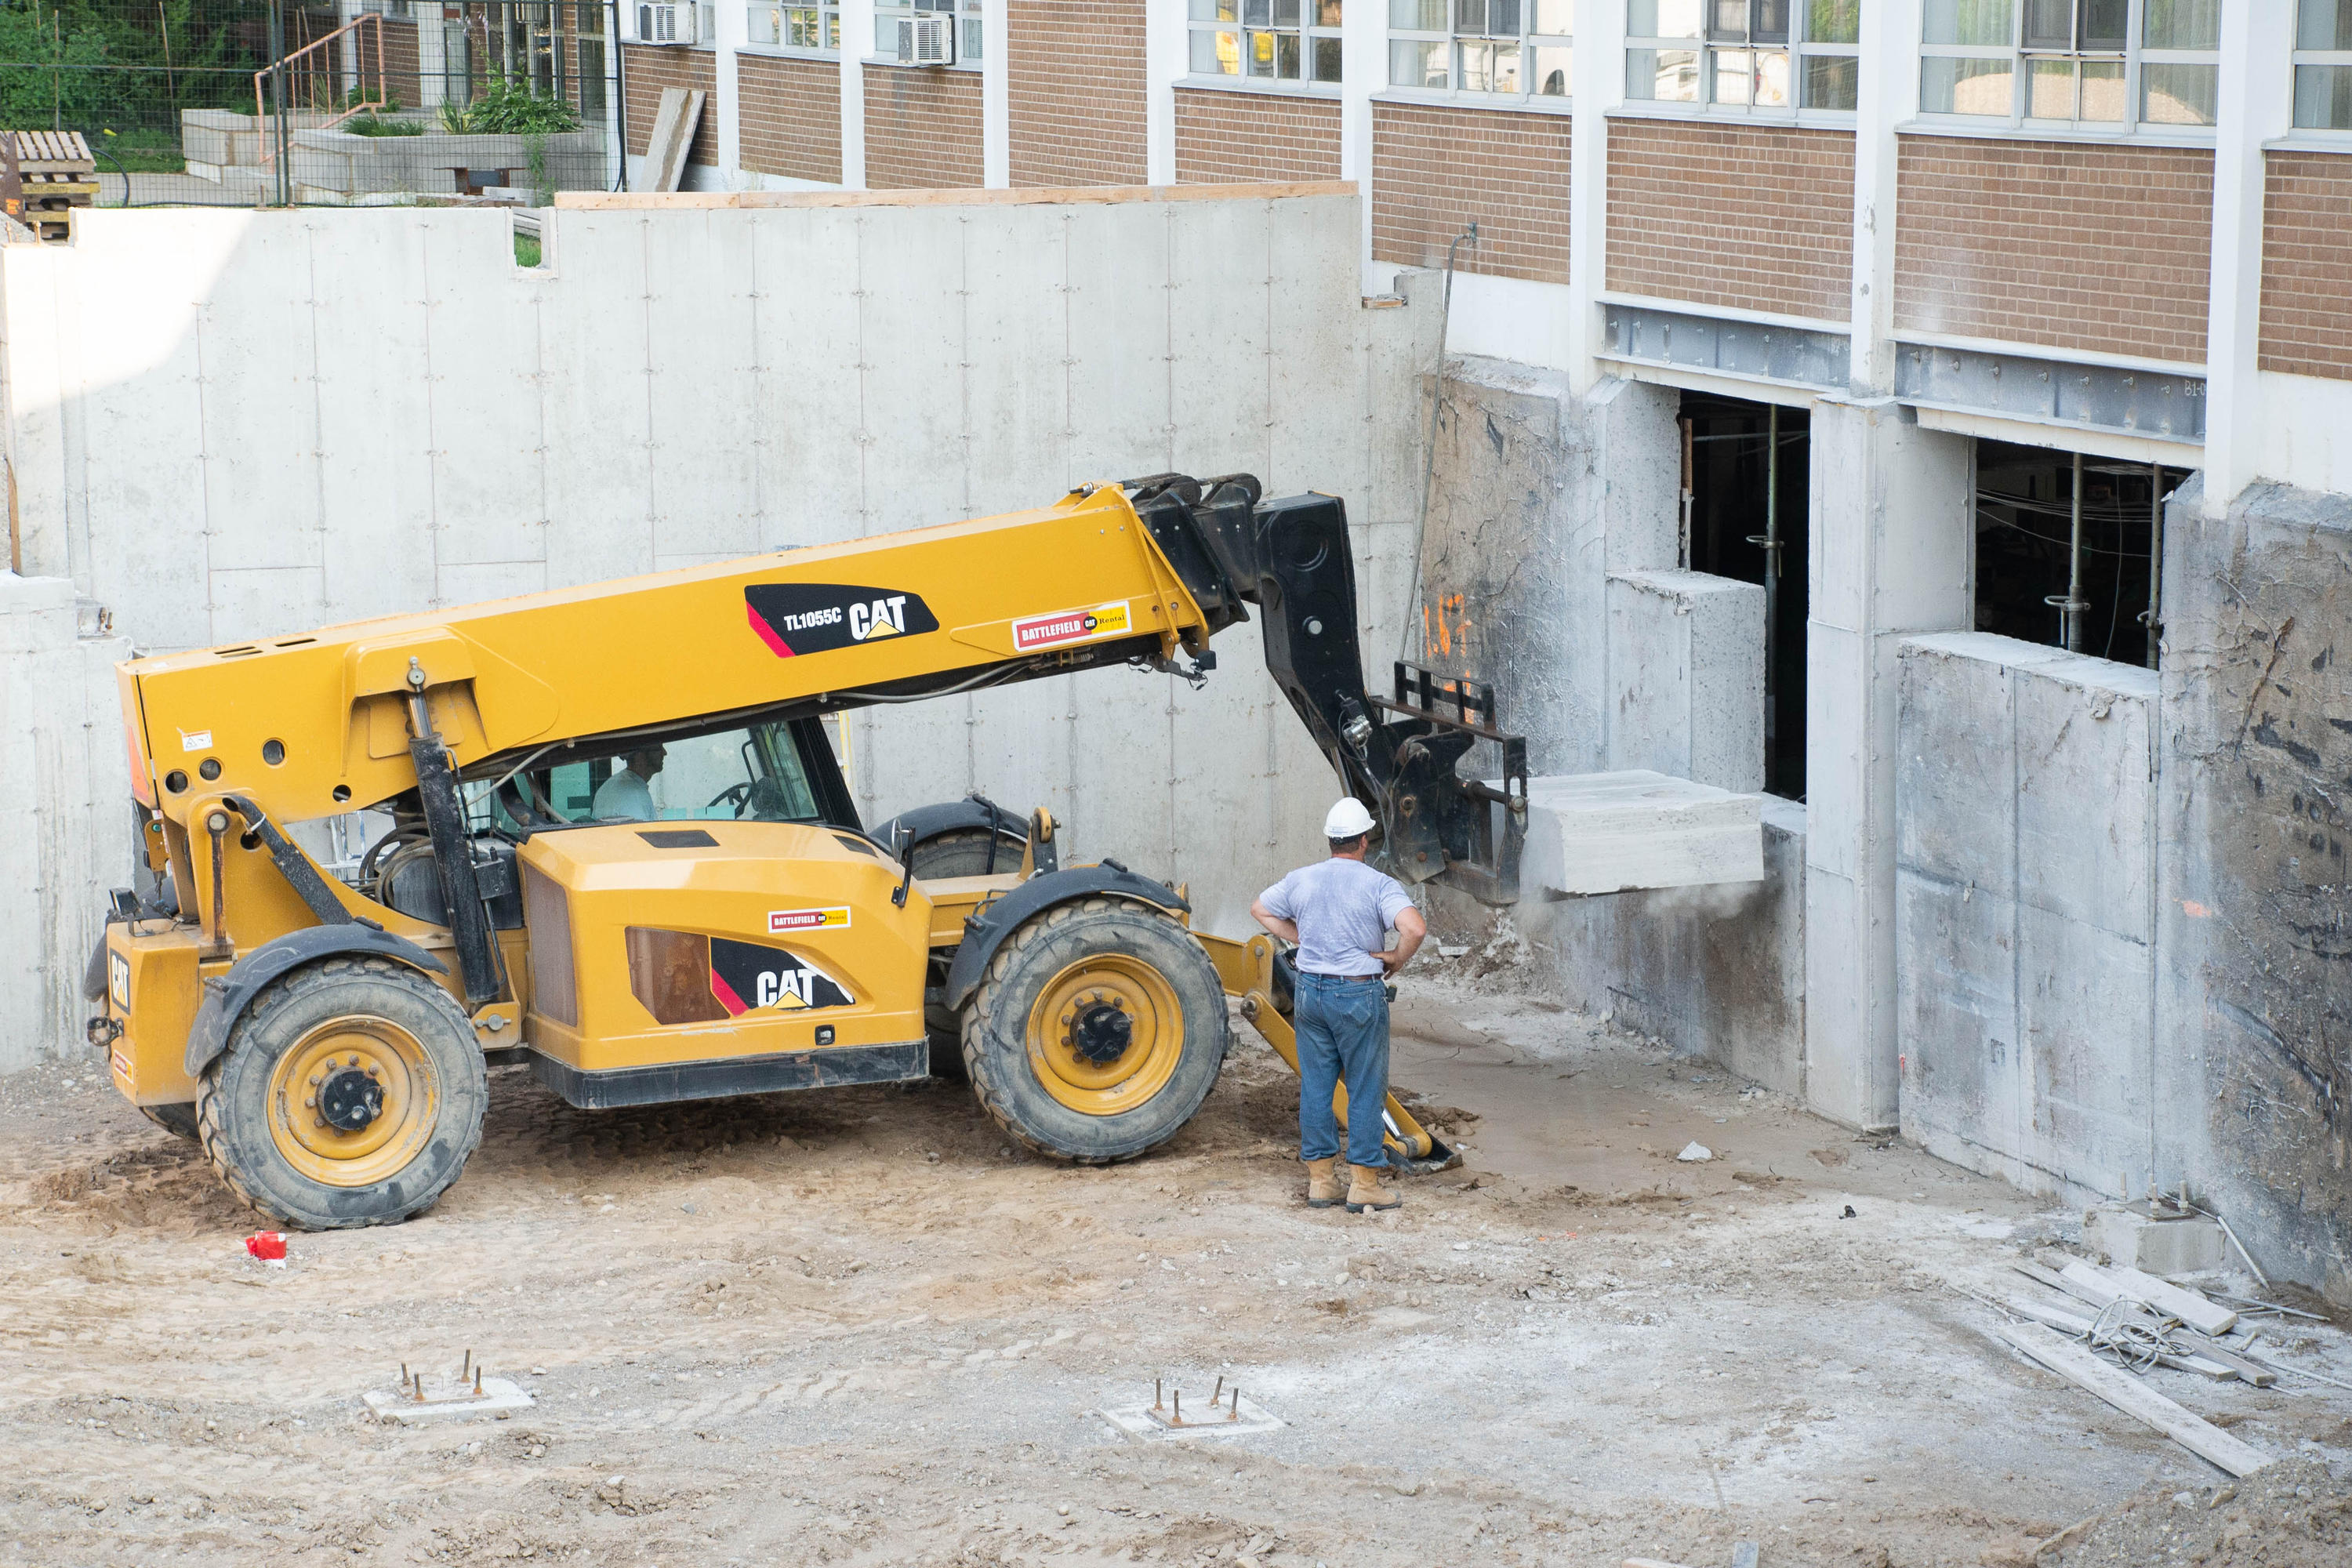 Concrete is removed from foundation by heavy machinery